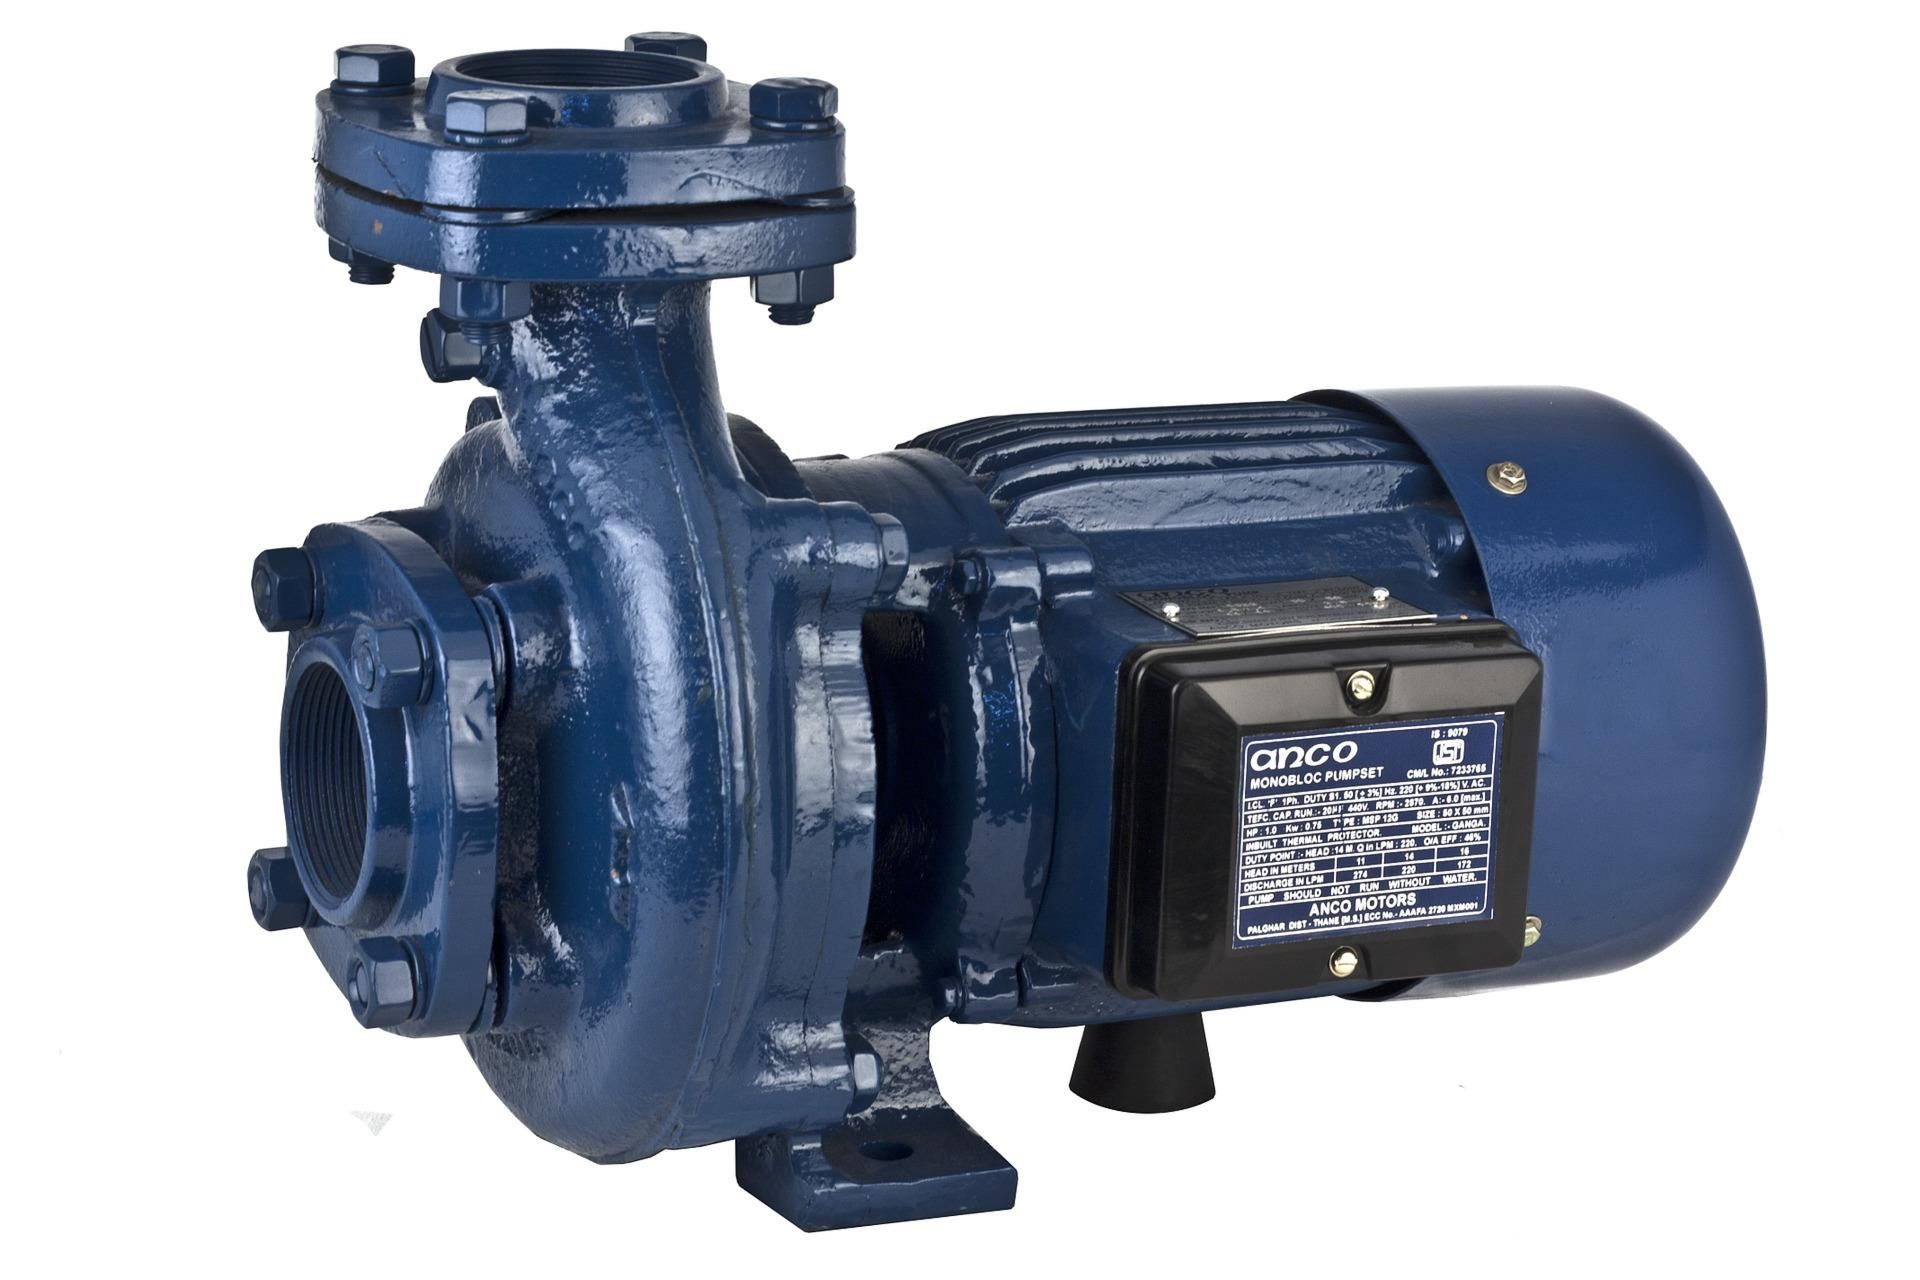 WANT TO PROTECT YOUR PUMPS?